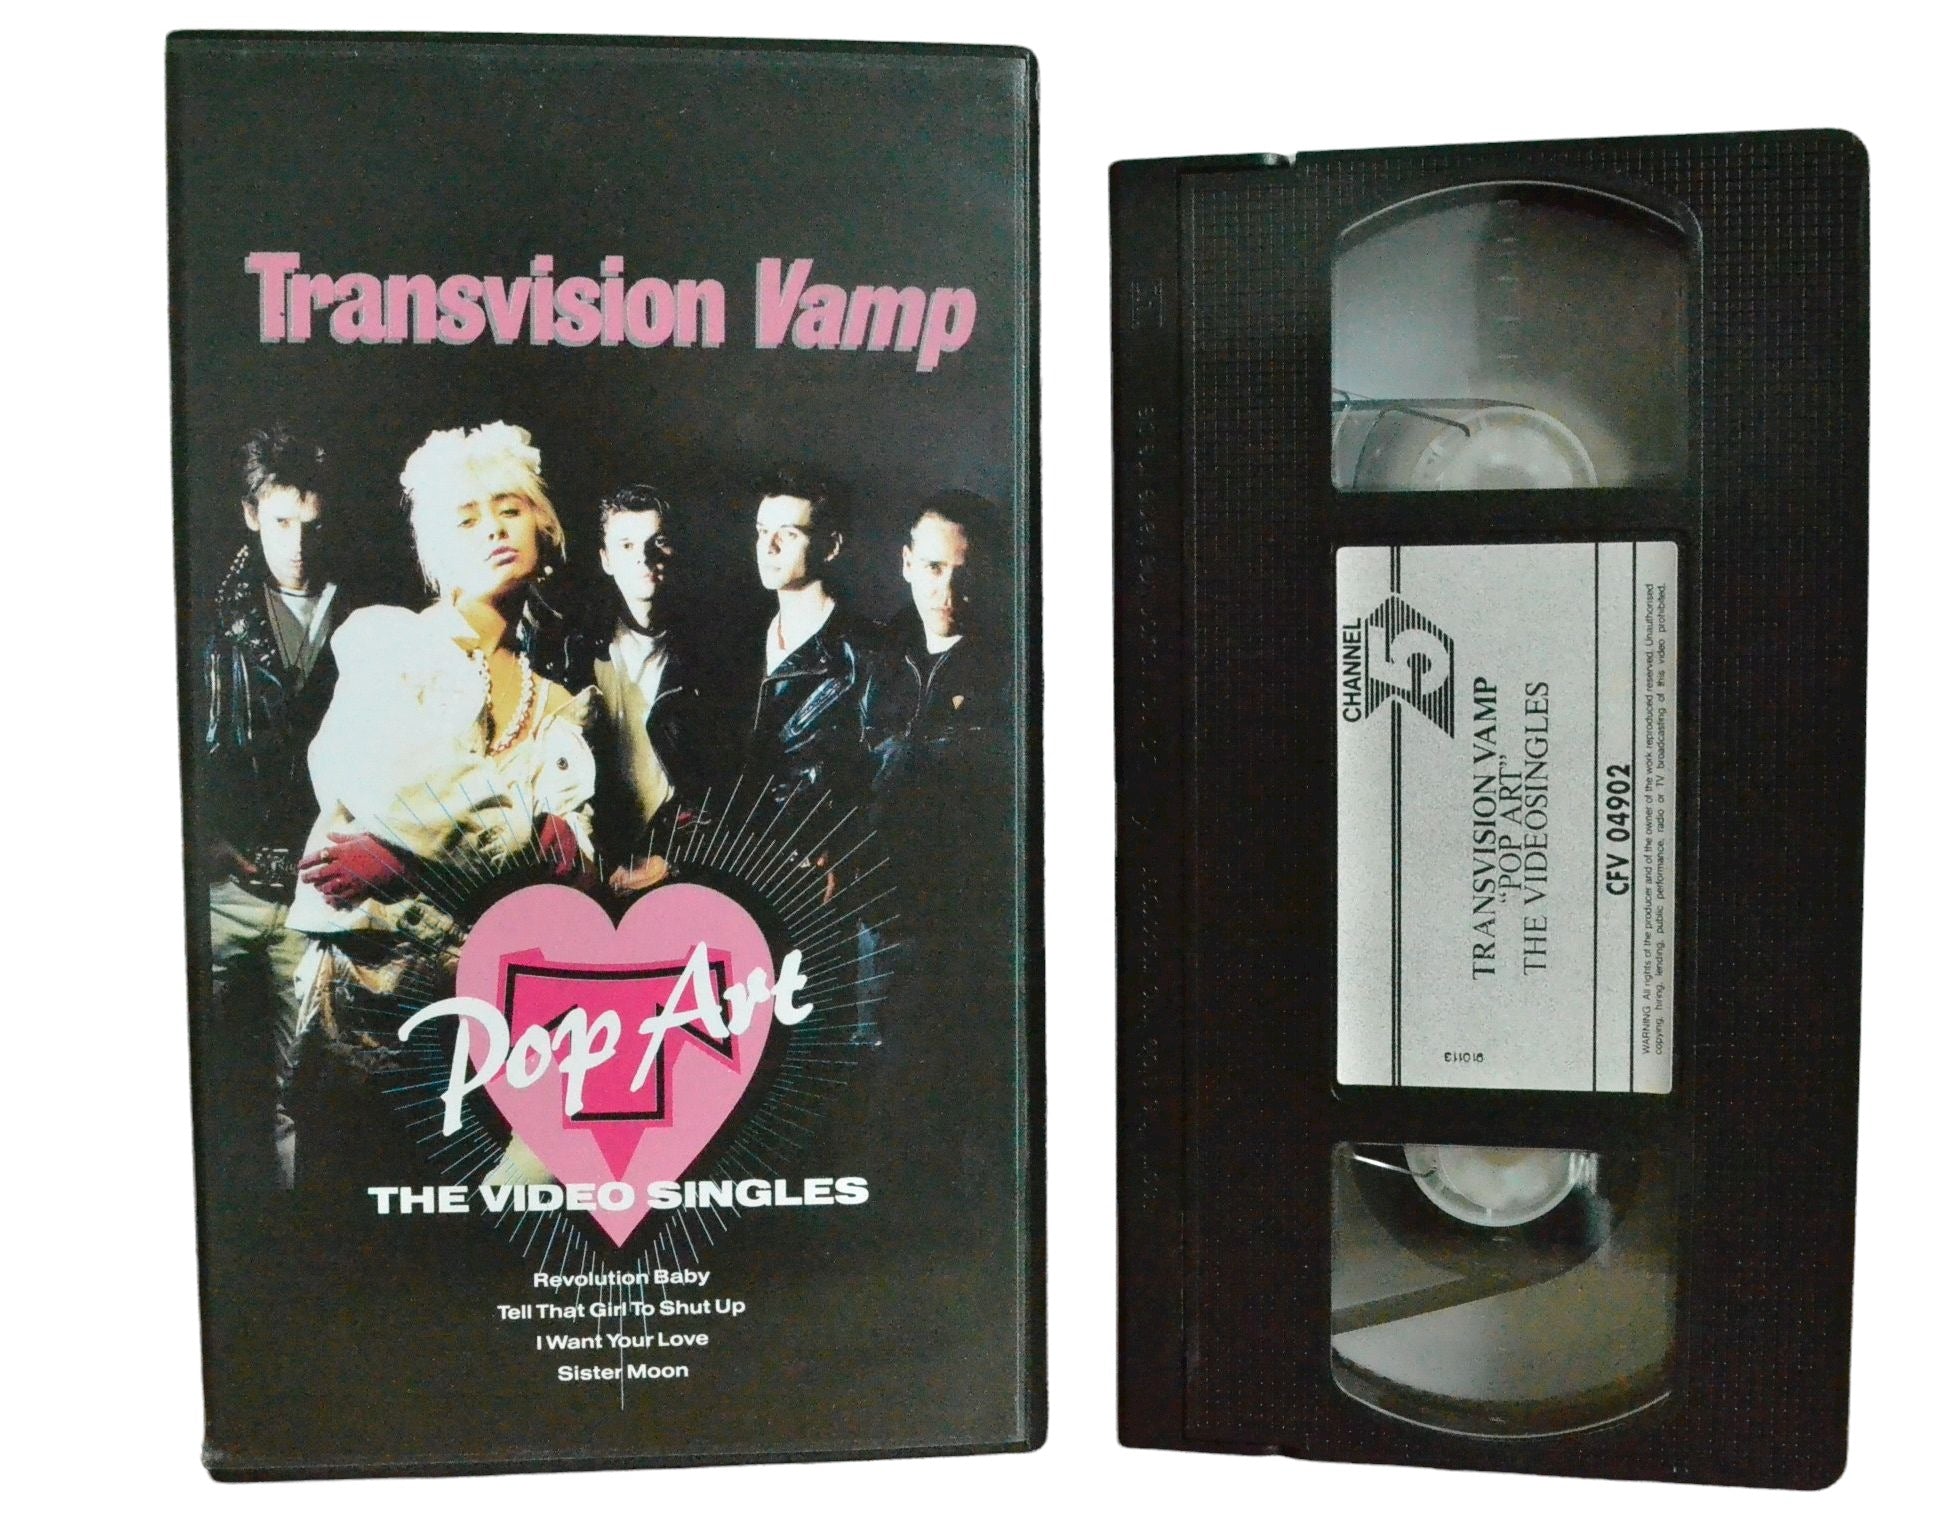 Transvision Vamp "Pop Art" The Video Singles - Wendy James - Channel 5 - Music - Pal VHS-